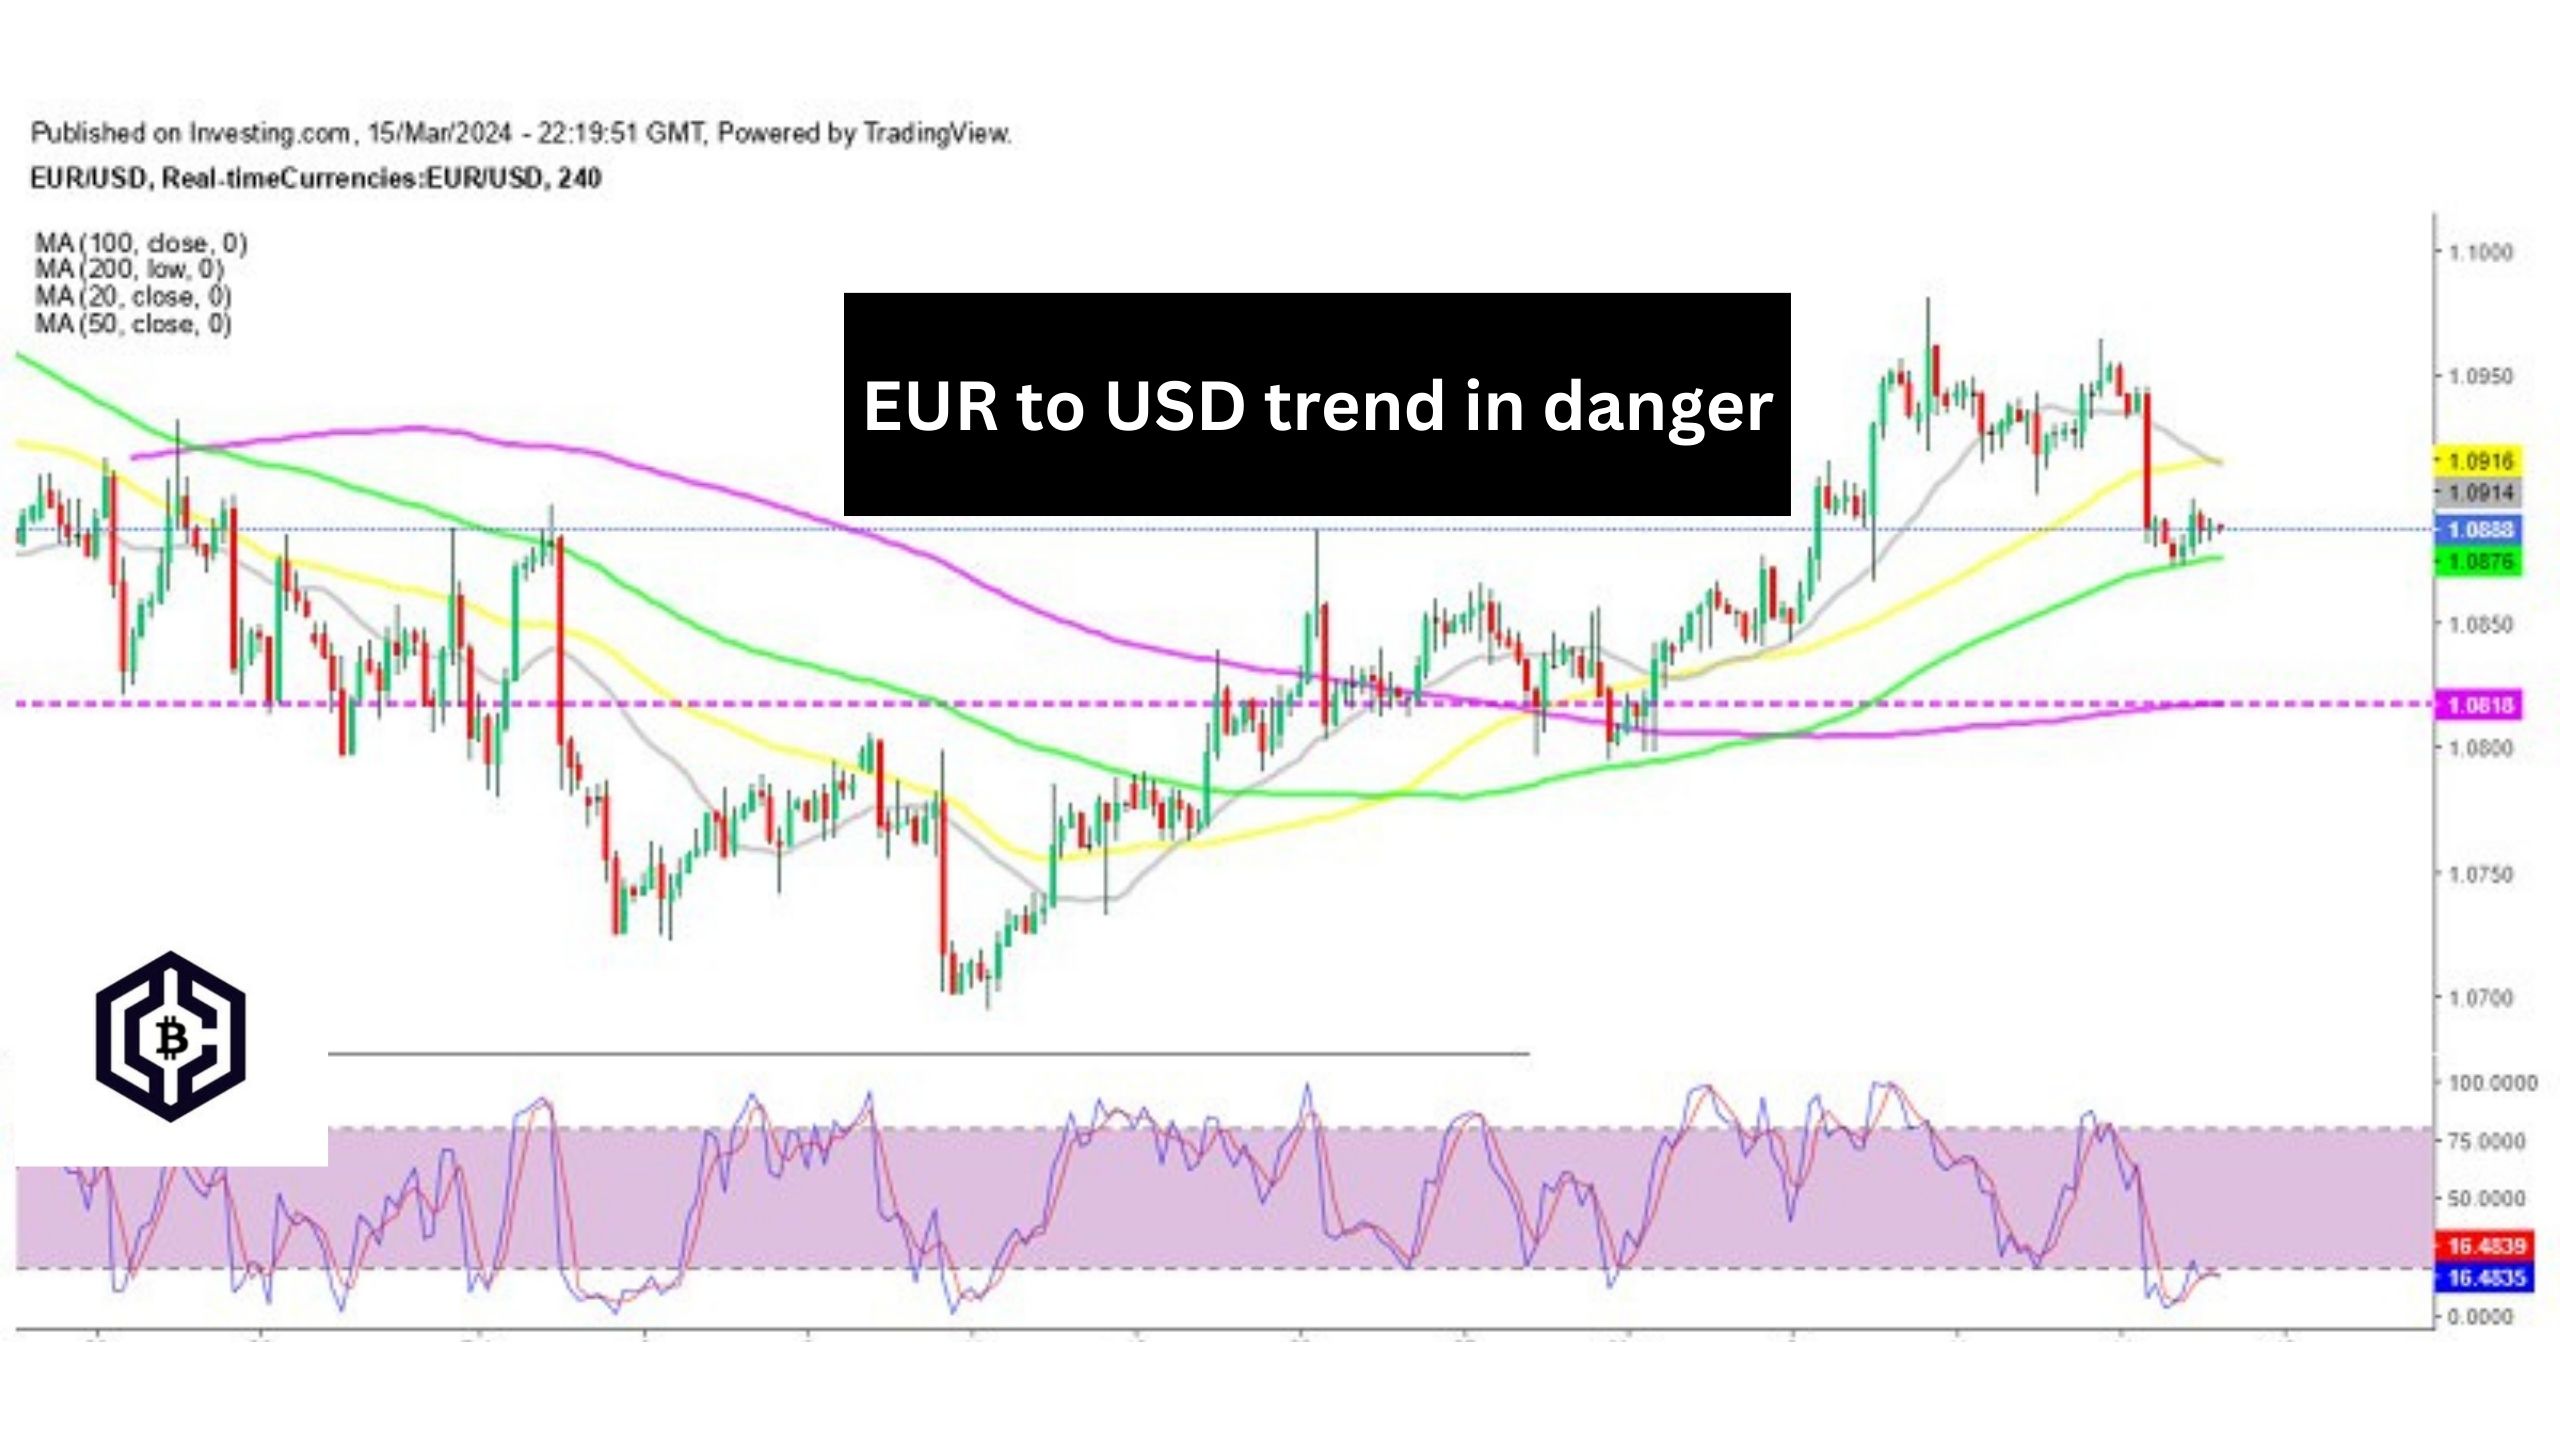 EUR to USD trend in danger due to ECB interest rate cut (1)